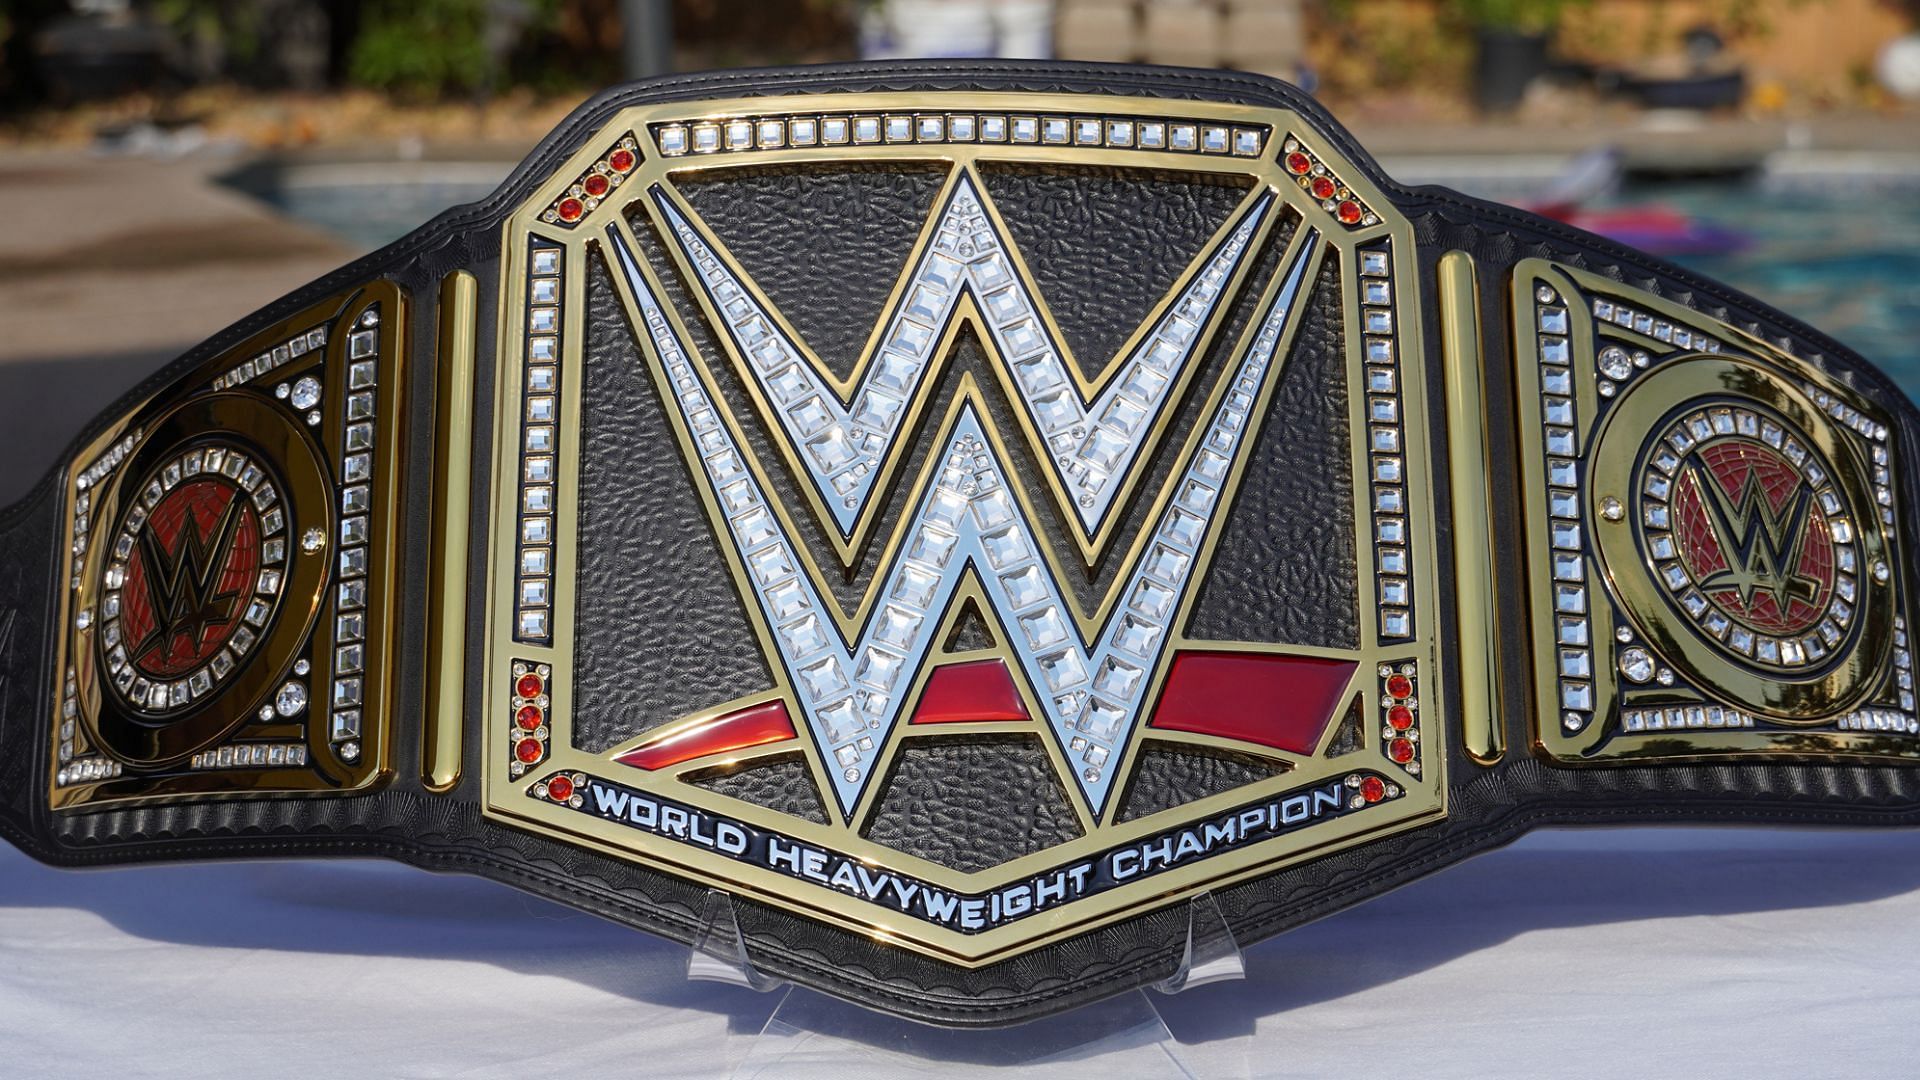 WWE Championship was redesigned in 2014 after SummerSlam!